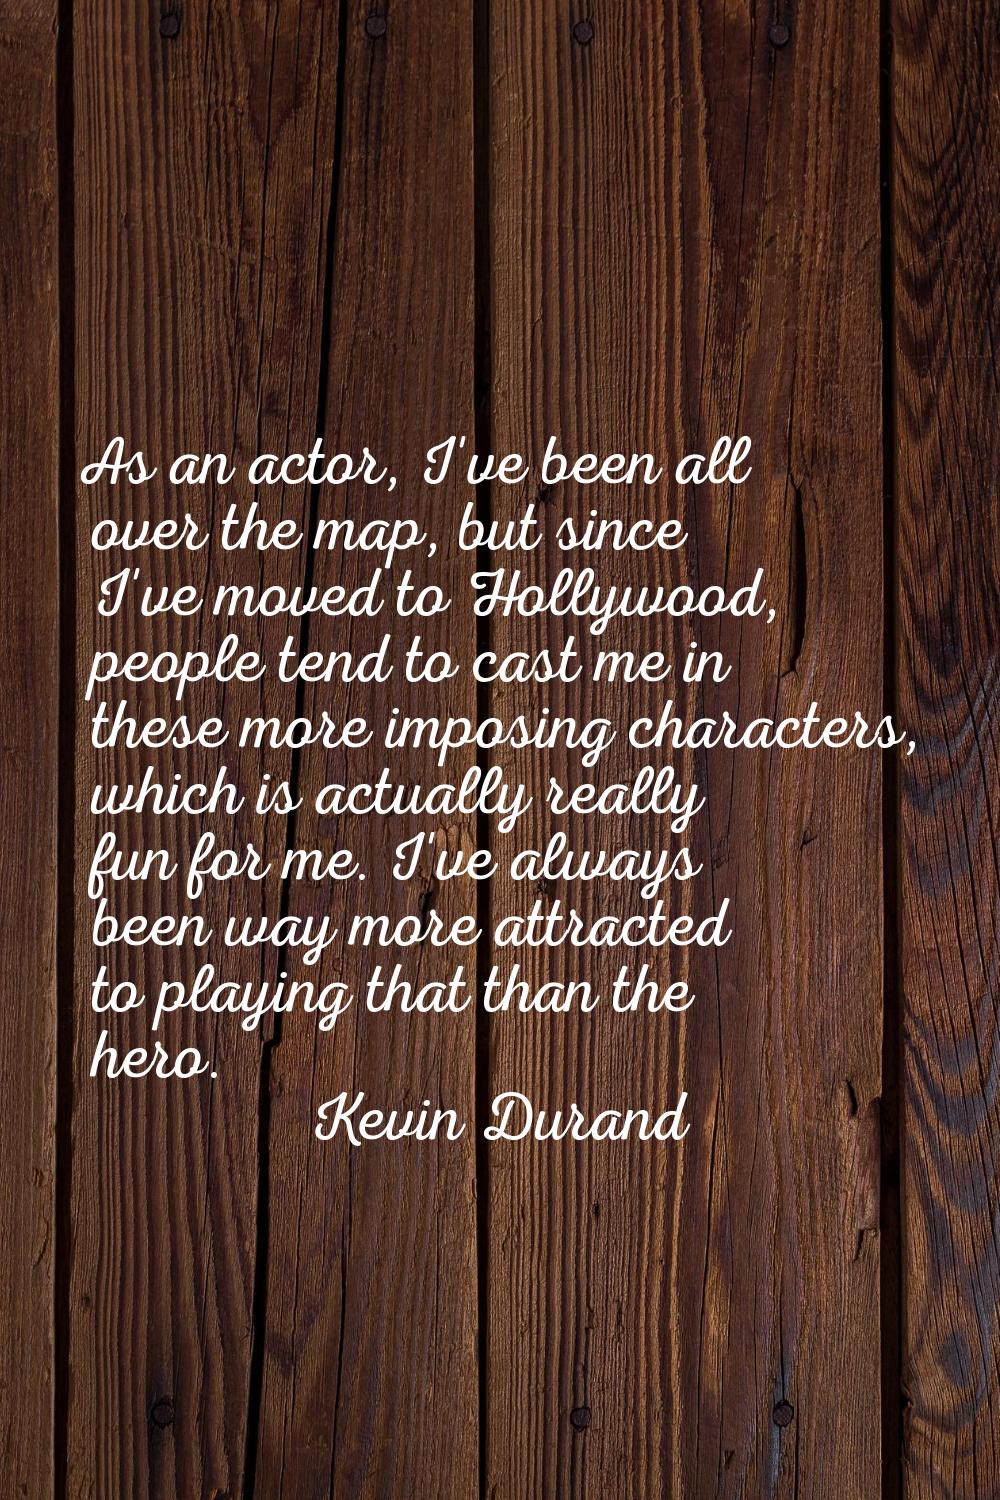 As an actor, I've been all over the map, but since I've moved to Hollywood, people tend to cast me 